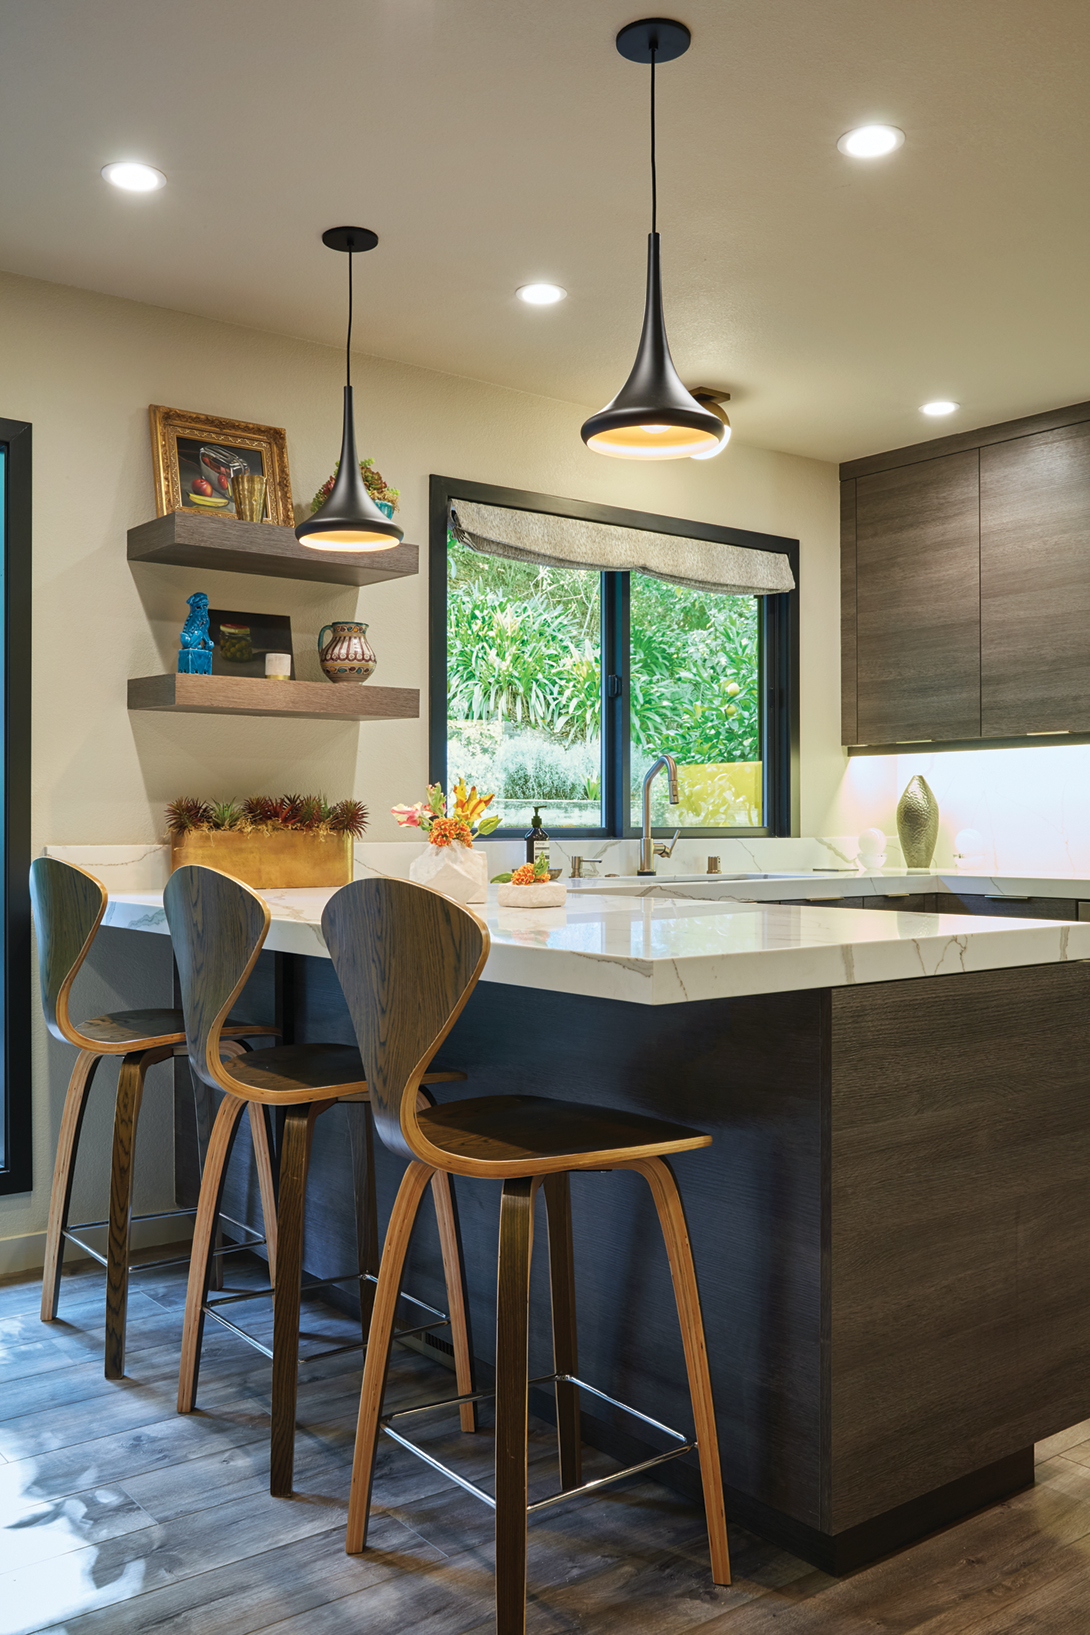 The reimagined kitchen in this Marin home remodel.